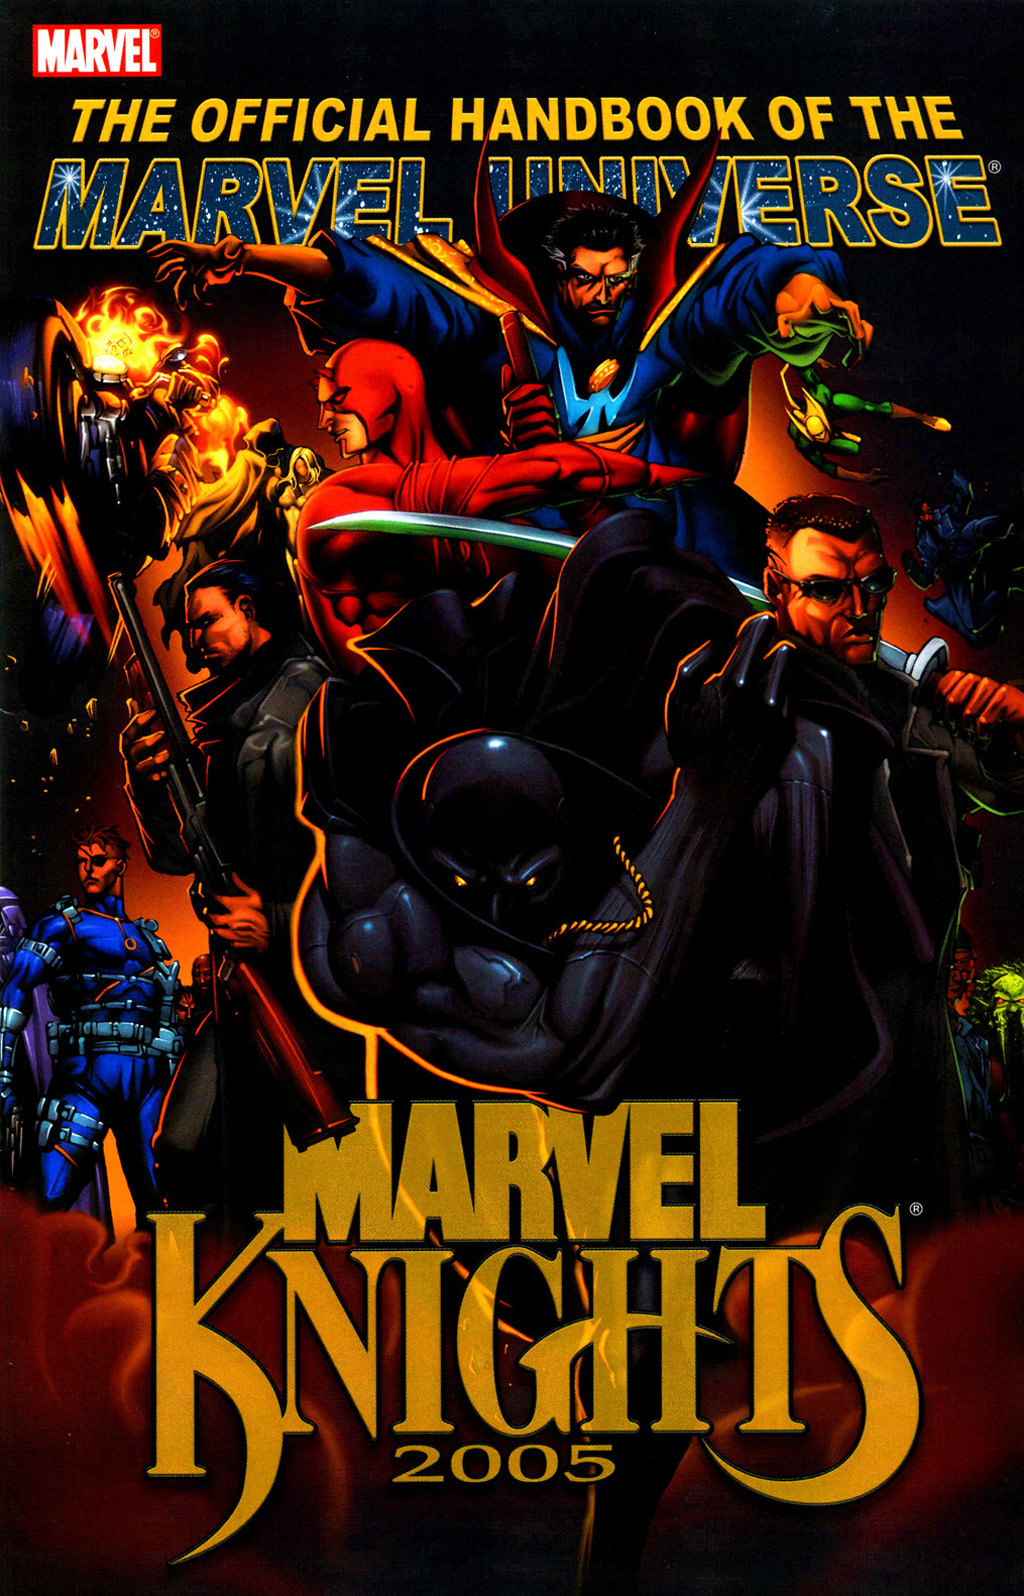 The Official Handbook of the Marvel Universe: Marvel Knights Full Page 1